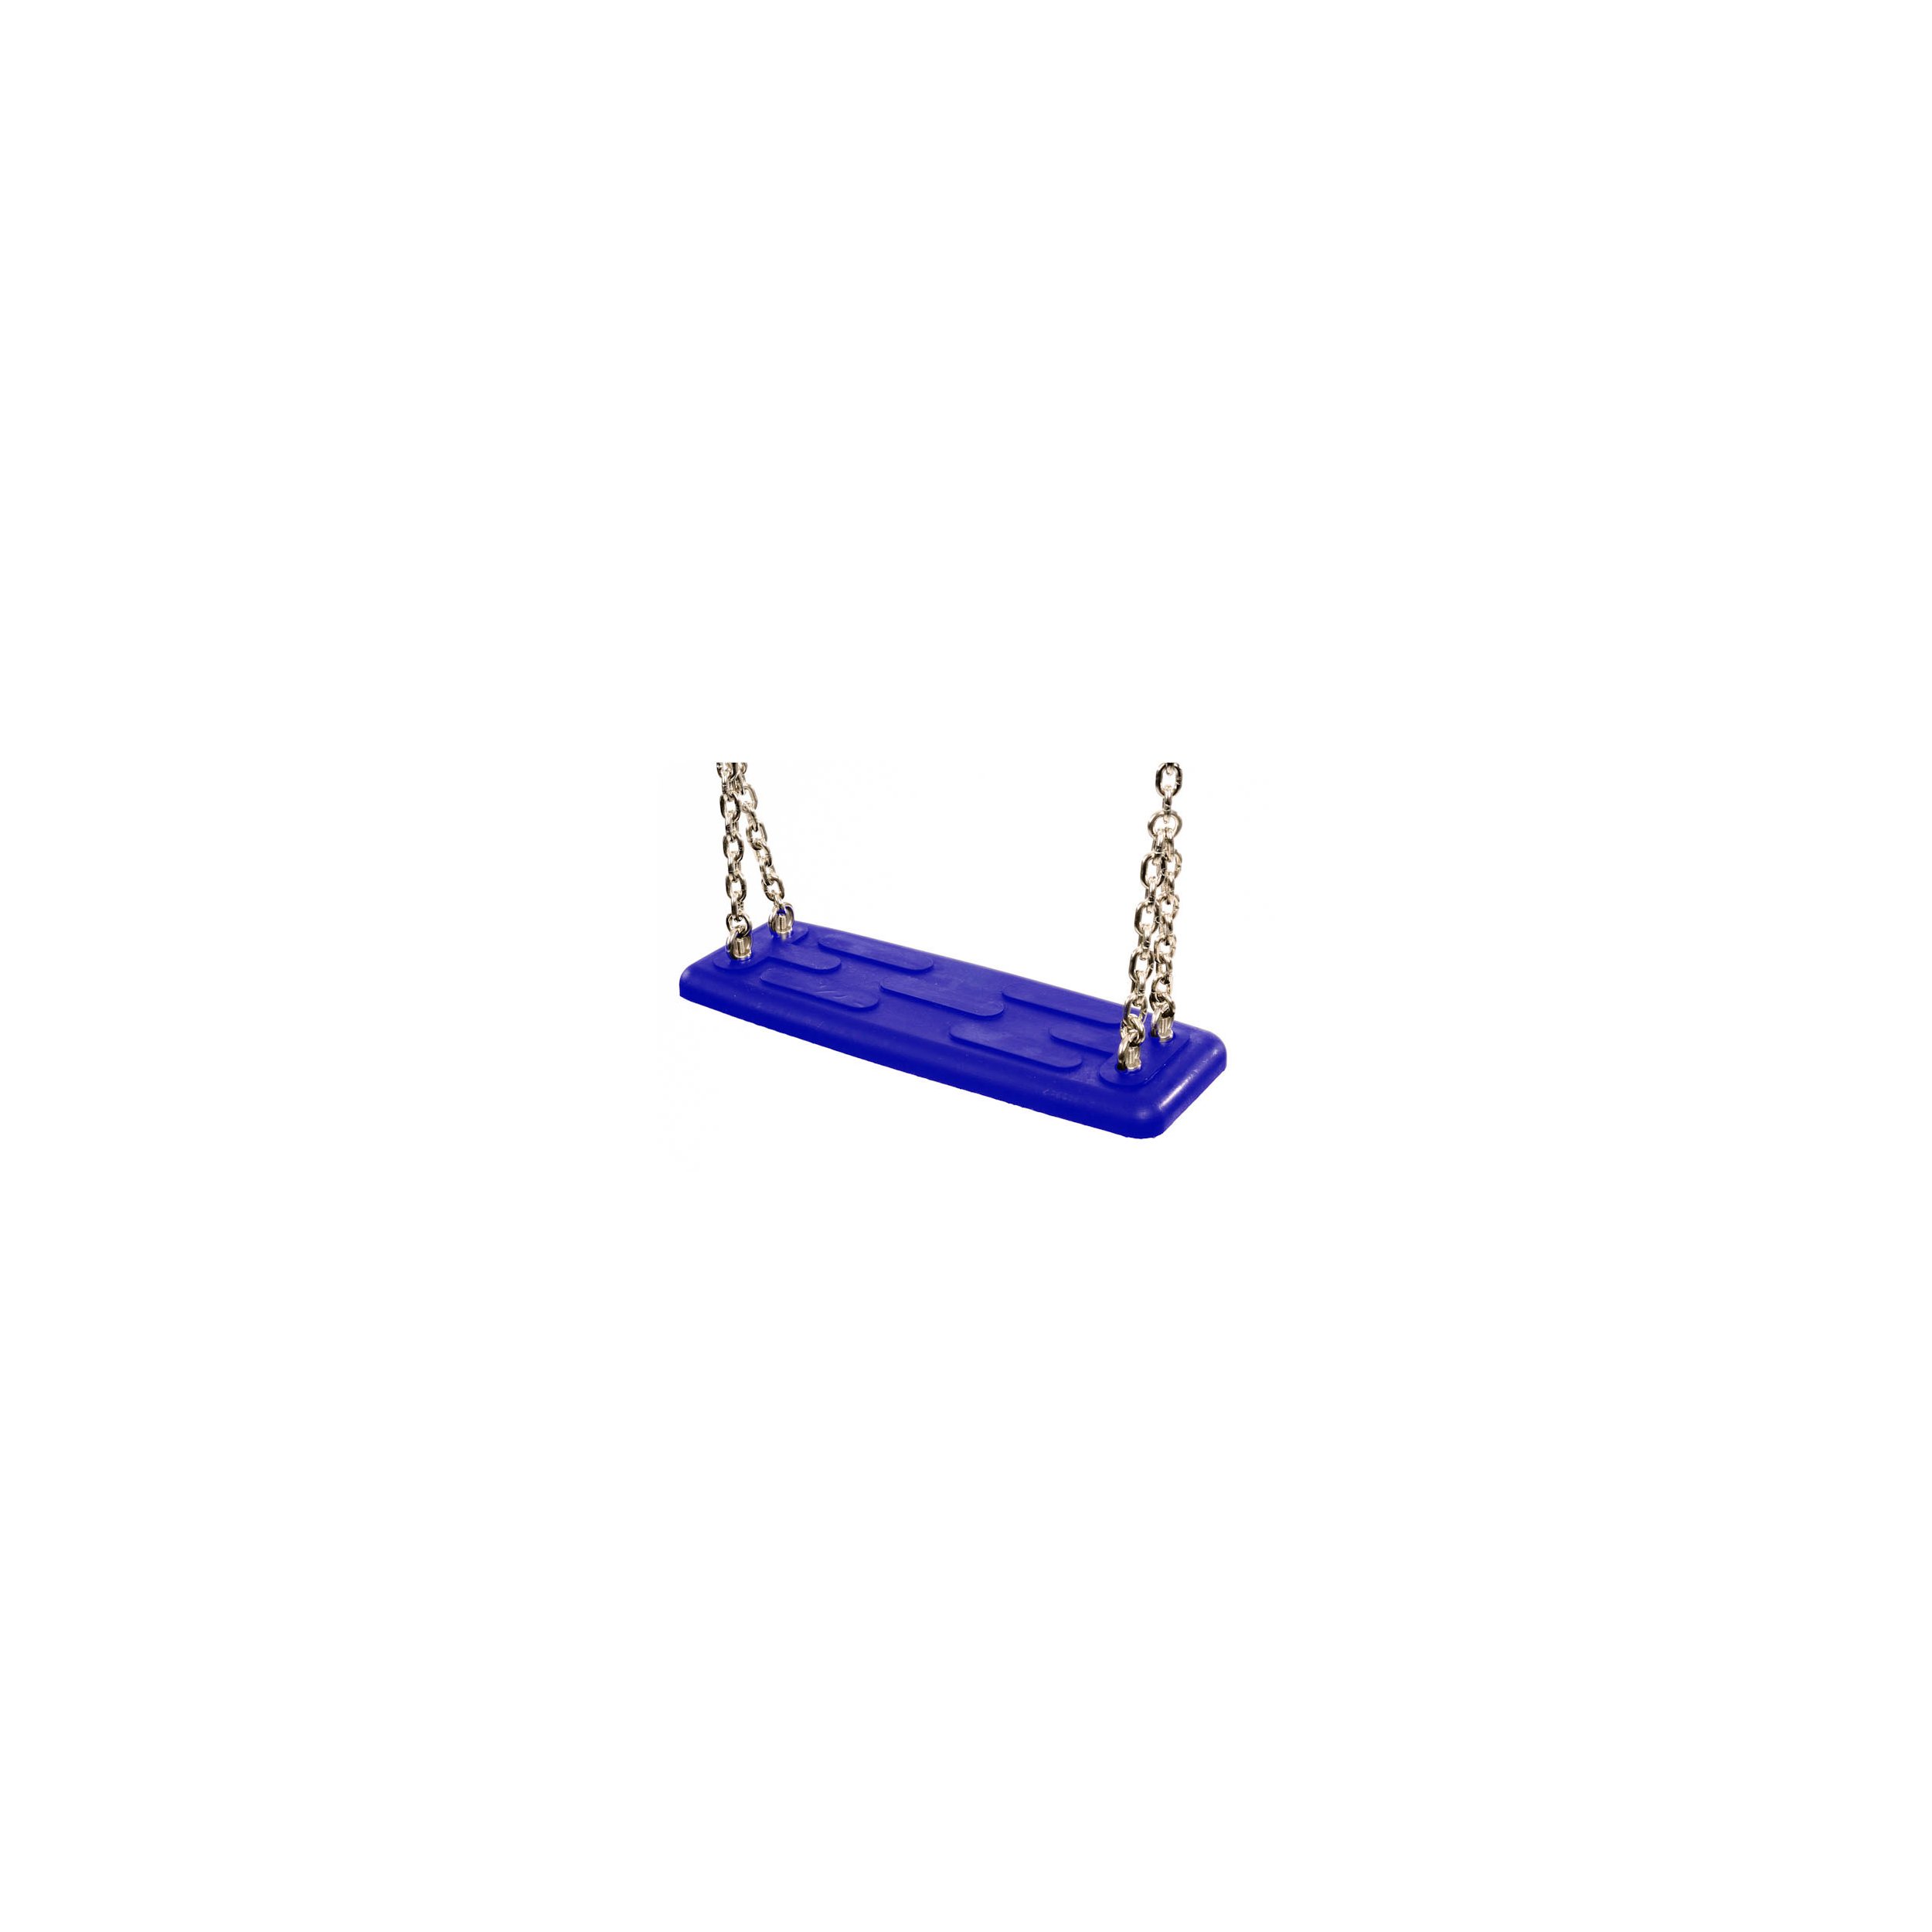 Commercial safety rubber swing seat type 1A blue without chains without chains